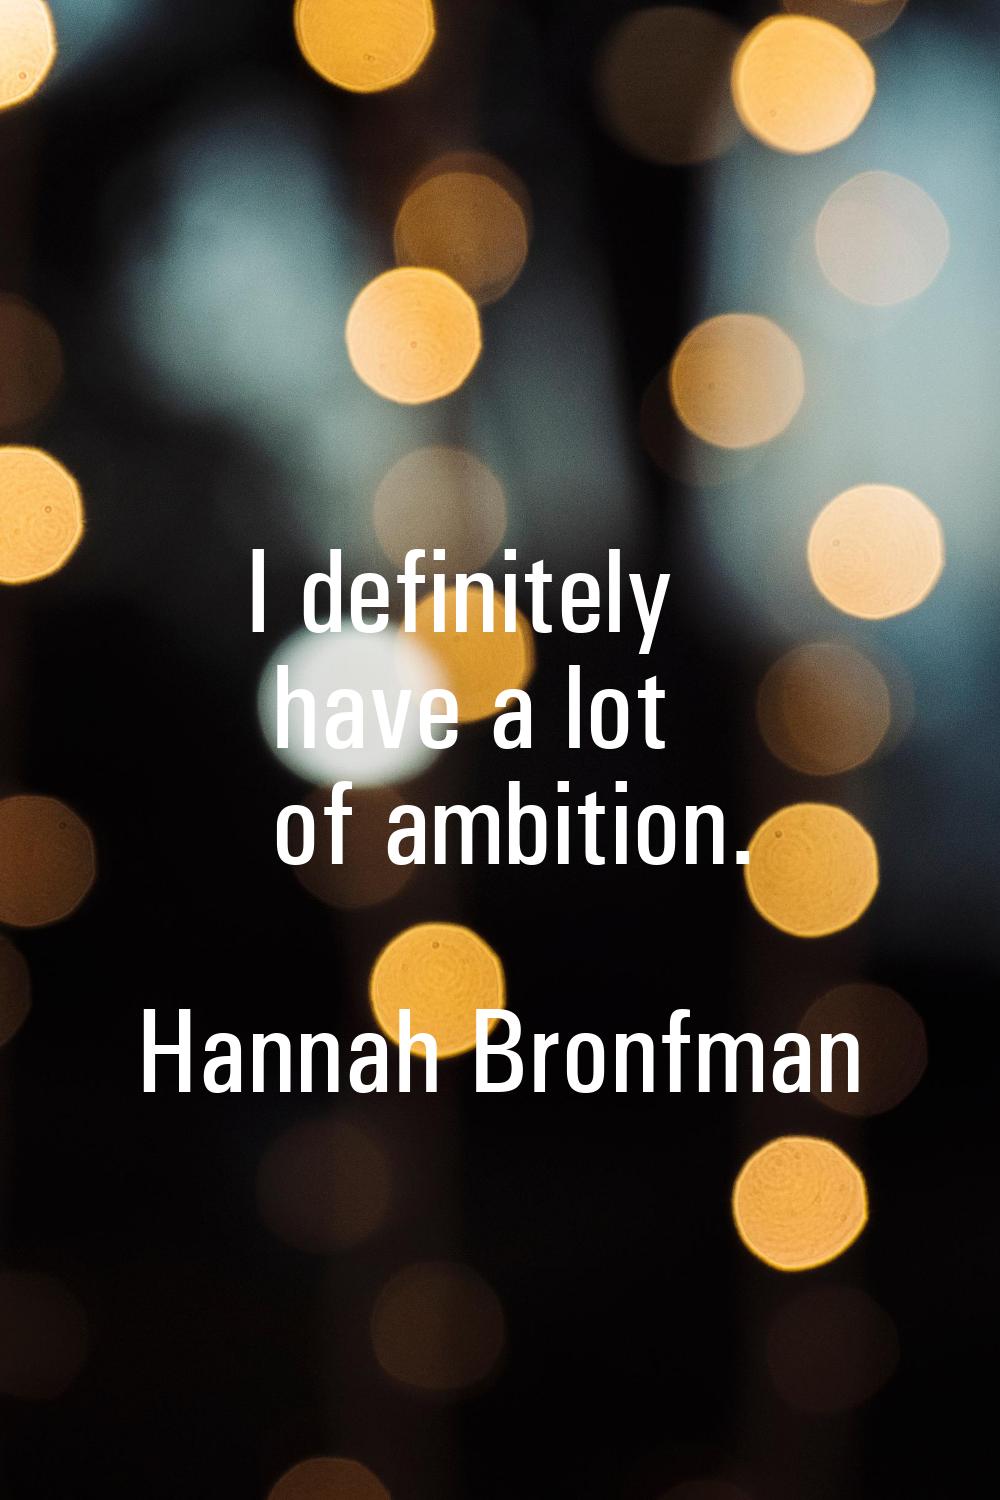 I definitely have a lot of ambition.